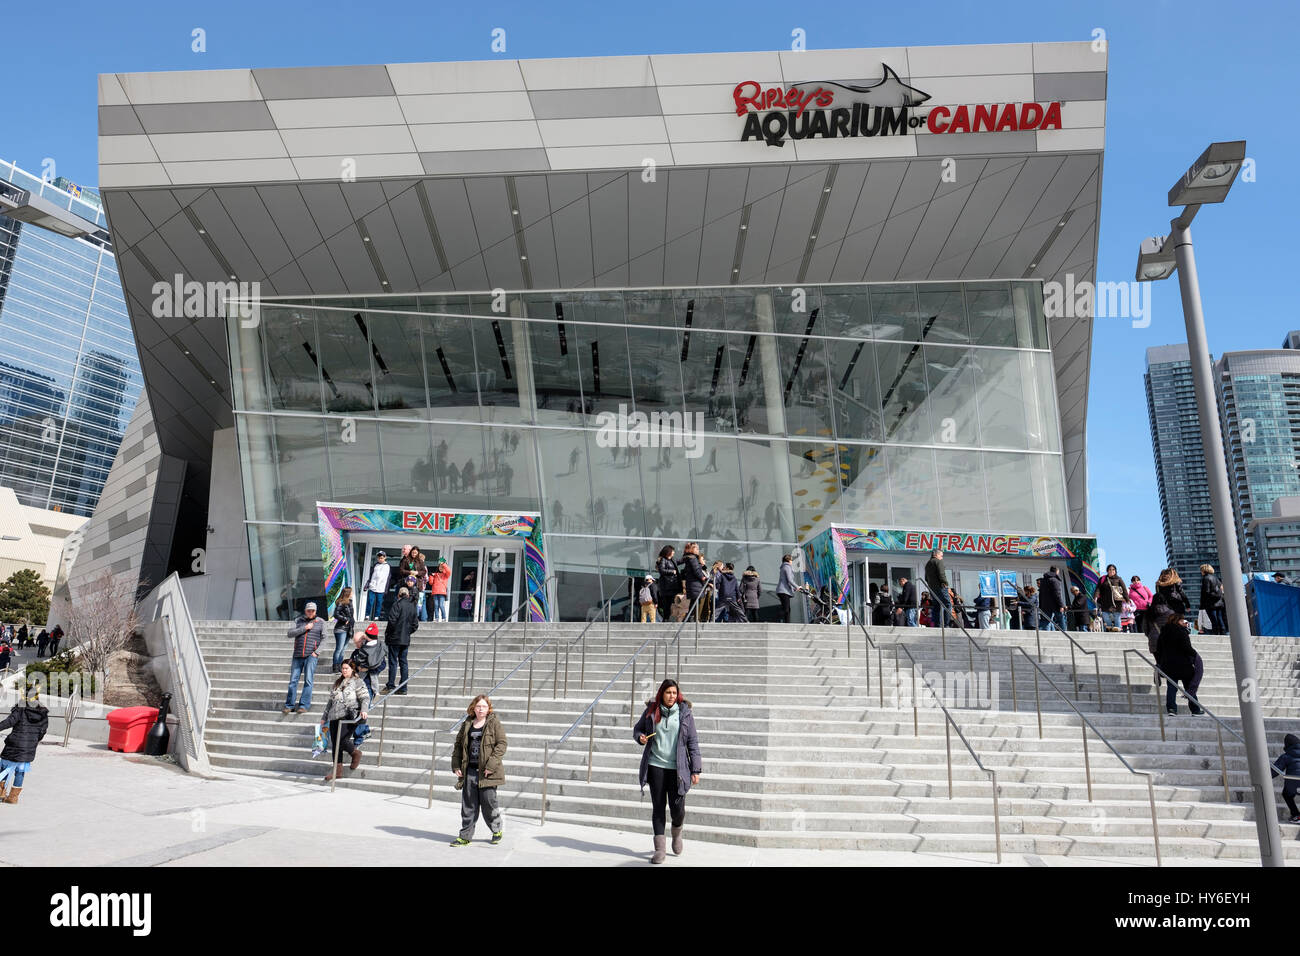 Ripley's Aquarium of Canada entrance, front view, tourists, visitors, ticket line stading outside, downtown Toronto, Ontario, Canada. Stock Photo